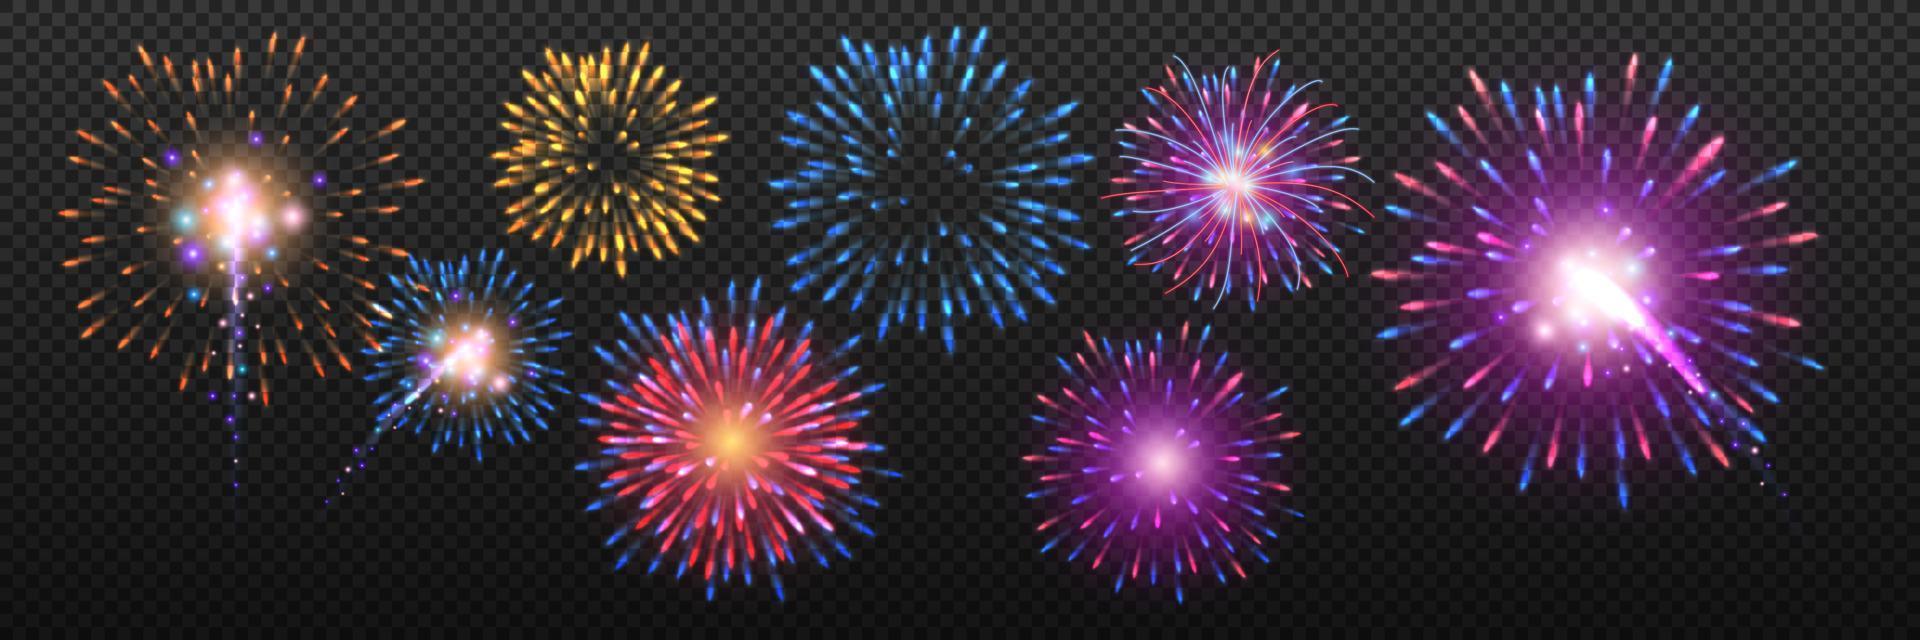 vector set of USA color fireworks in blue, red and white colors. EPS.